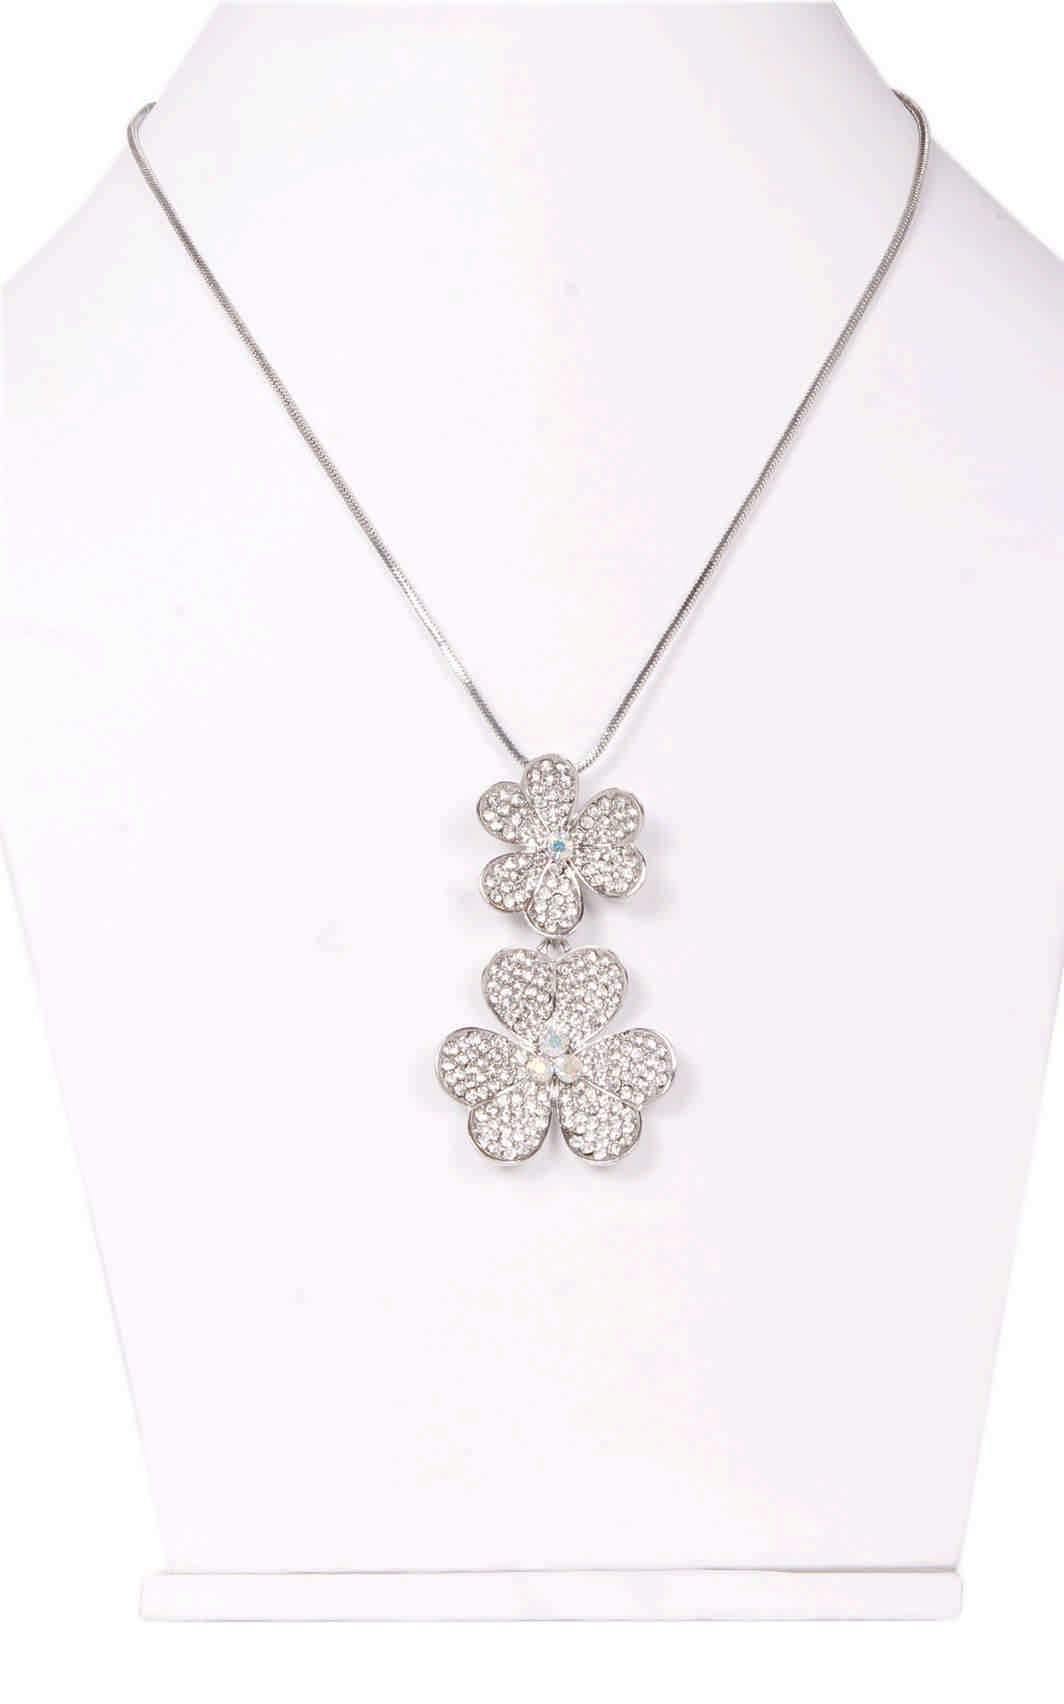 Indian Petals Rhinestones Studded Clover Leaf Design Imitation Fashion Metal Pendant with Long Chain for Girls